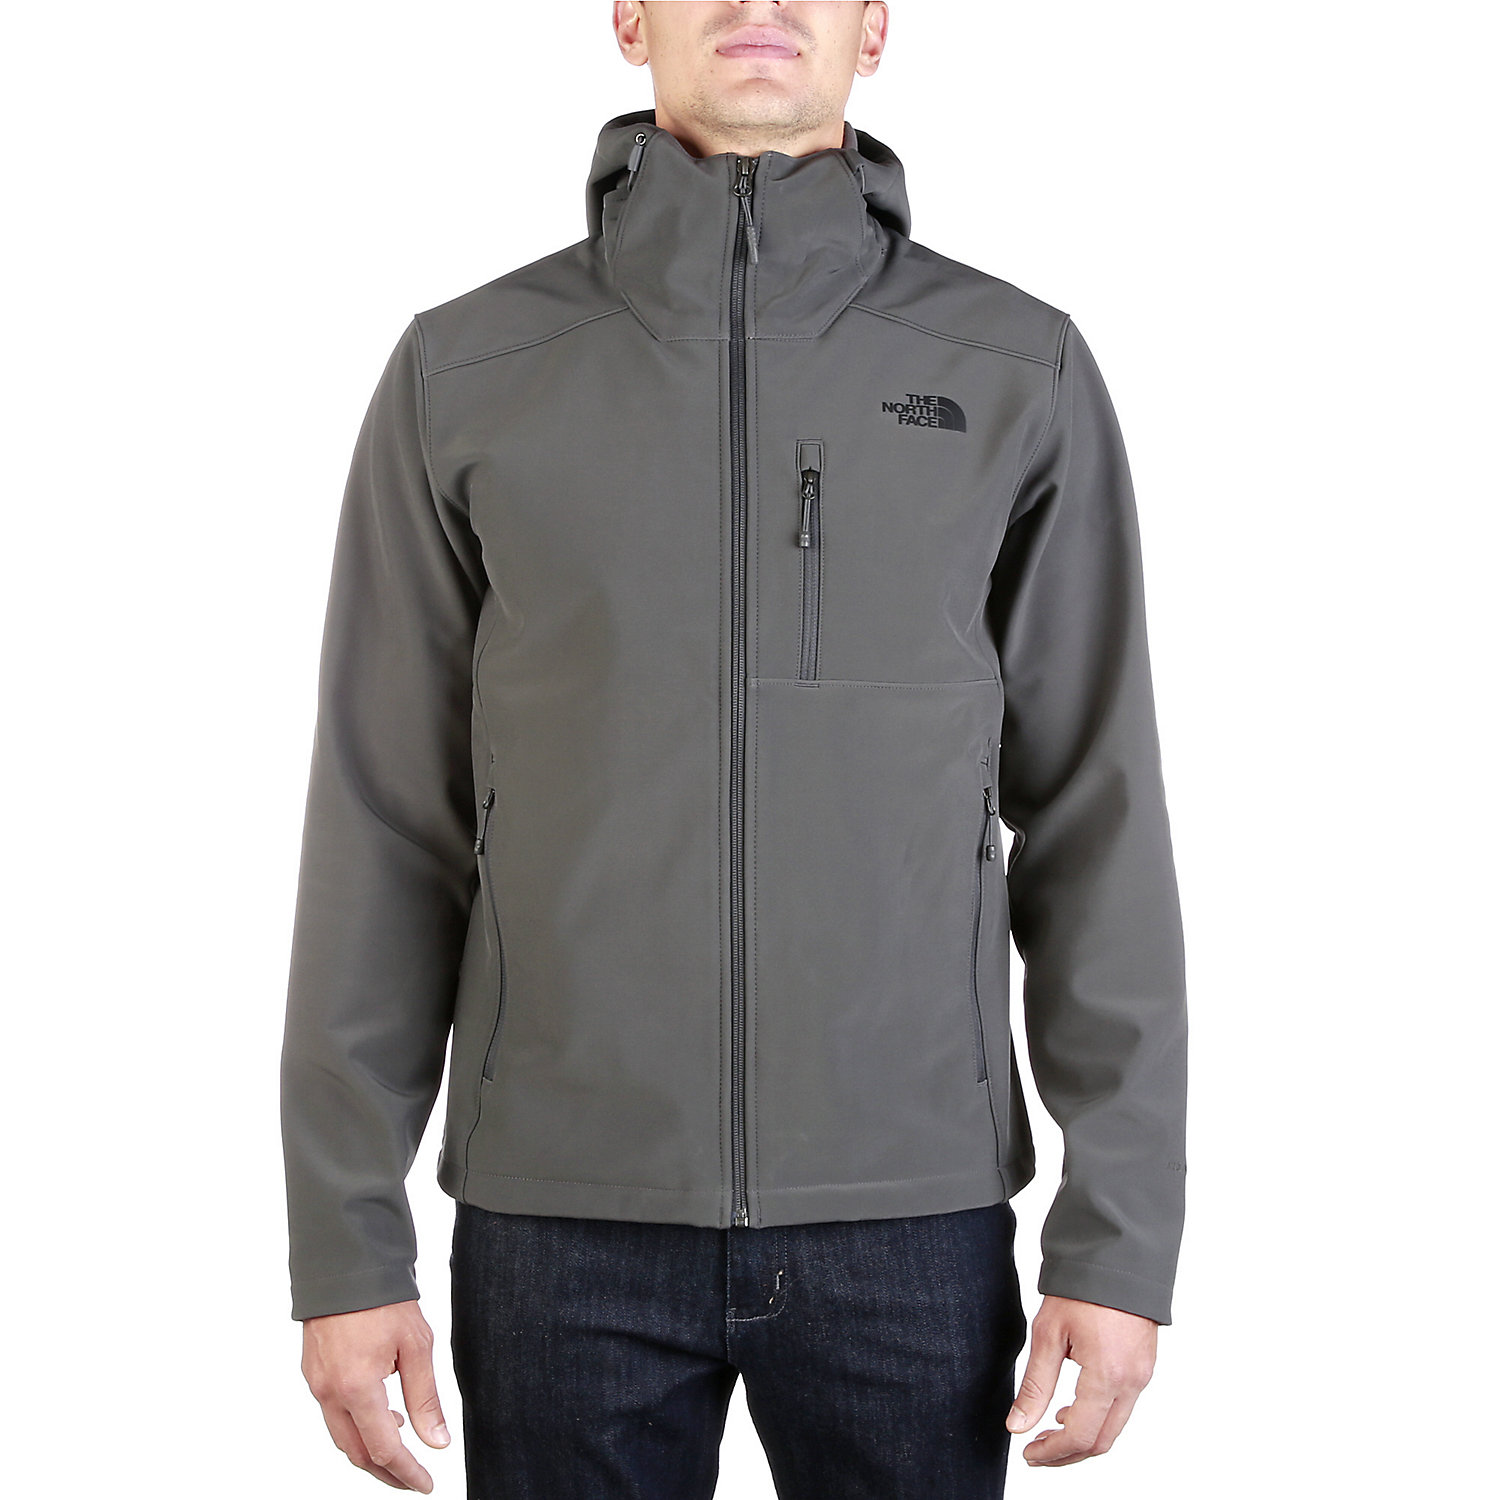 Scherm Extreme armoede dosis The North Face Men's Apex Bionic 2 Hoodie - Moosejaw